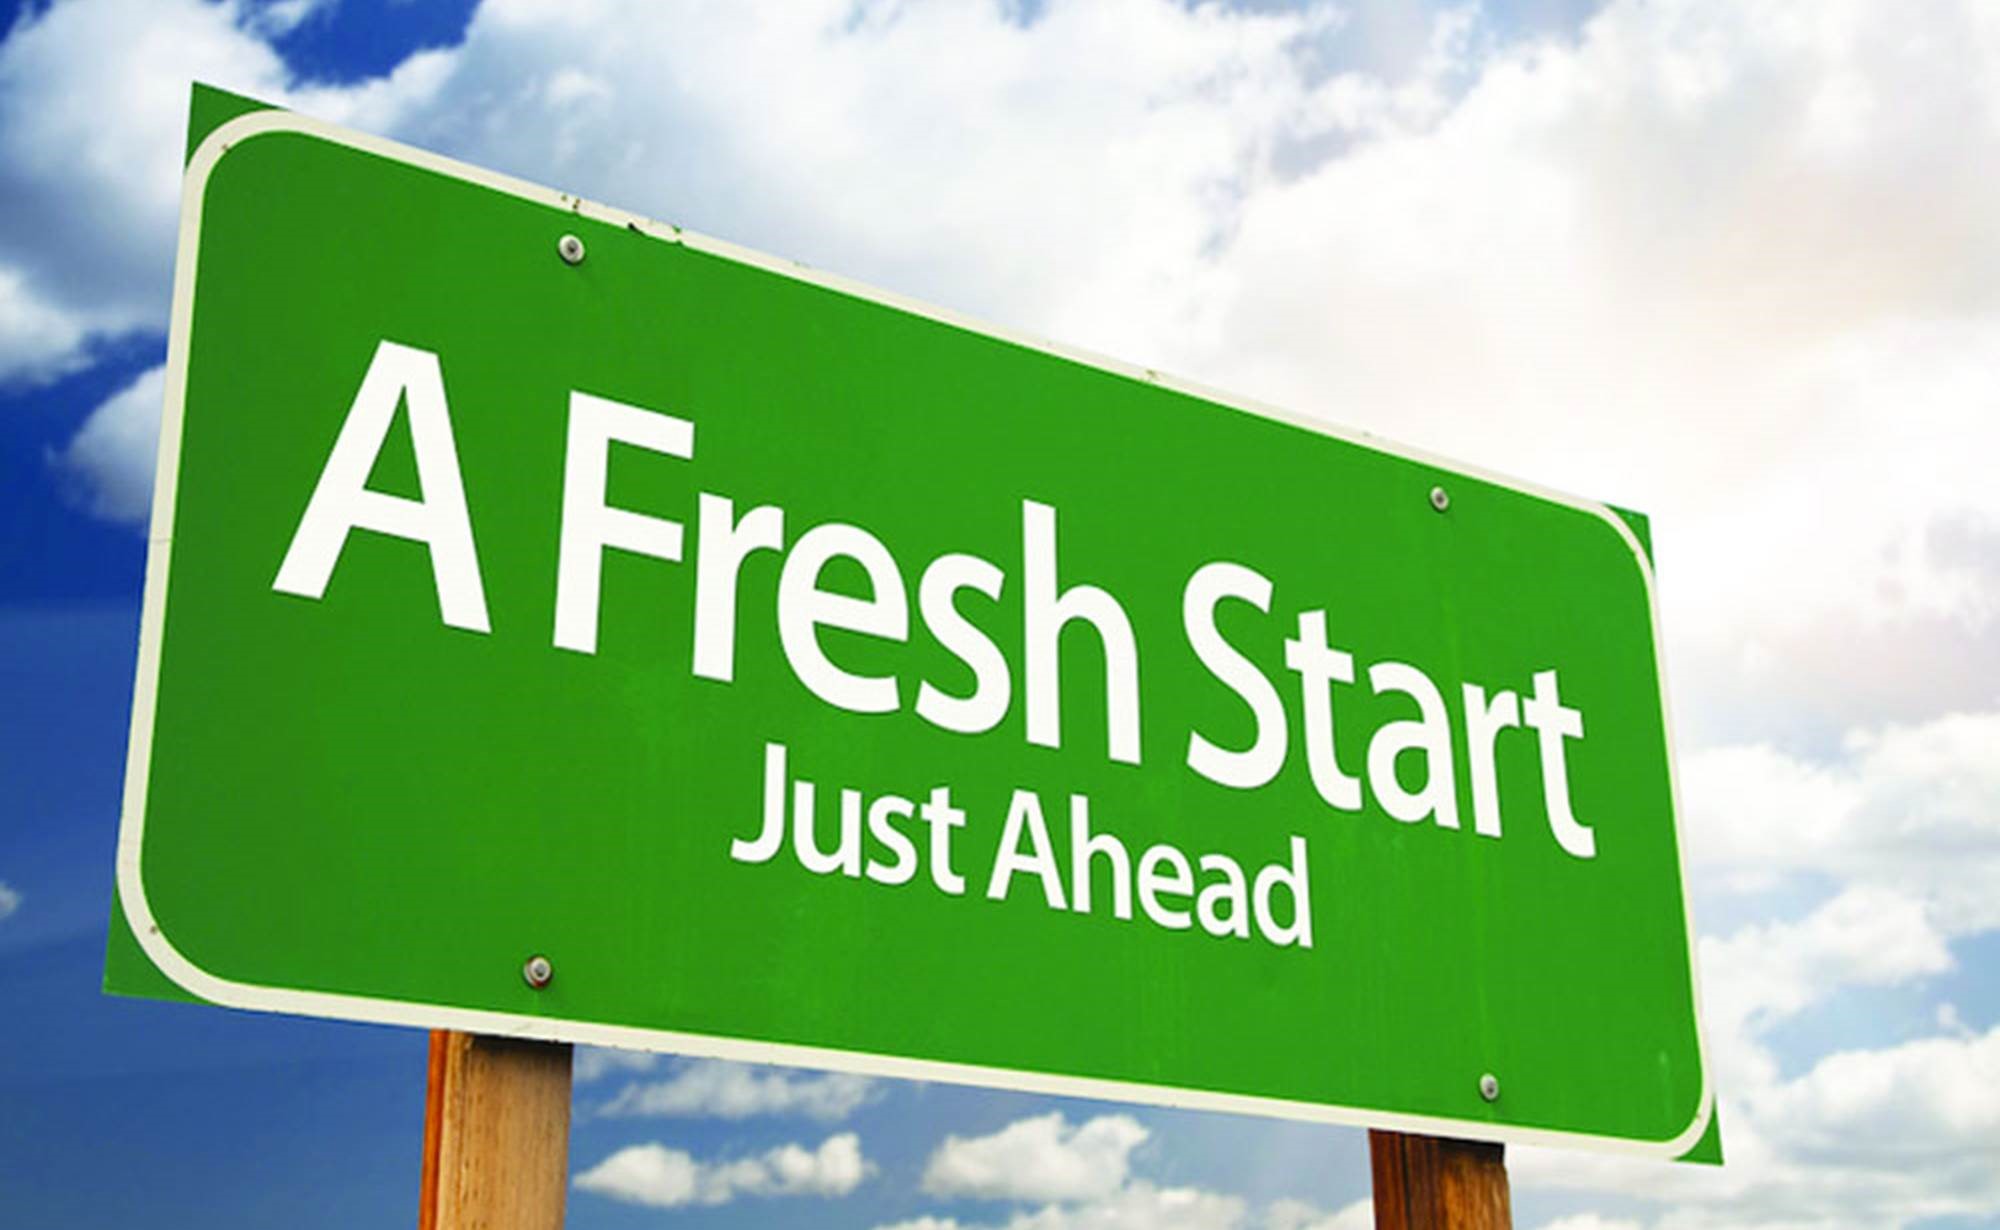 “Fresh Start” Initiative Puts Defaulted Borrowers in Good Standing